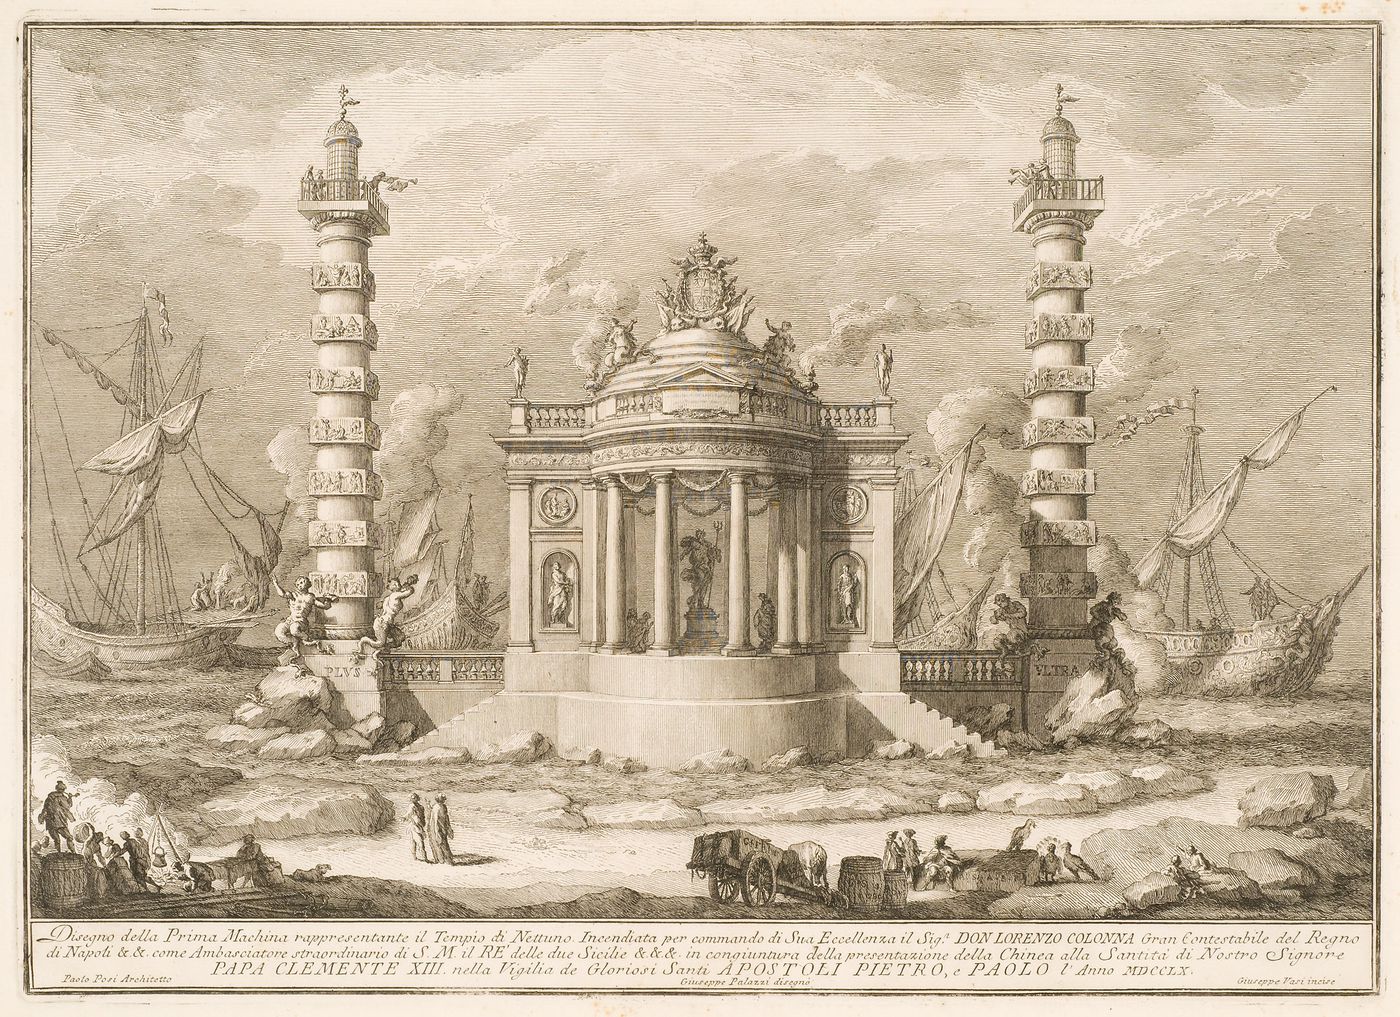 Etching of Posi's design for the "prima macchina" of 1760